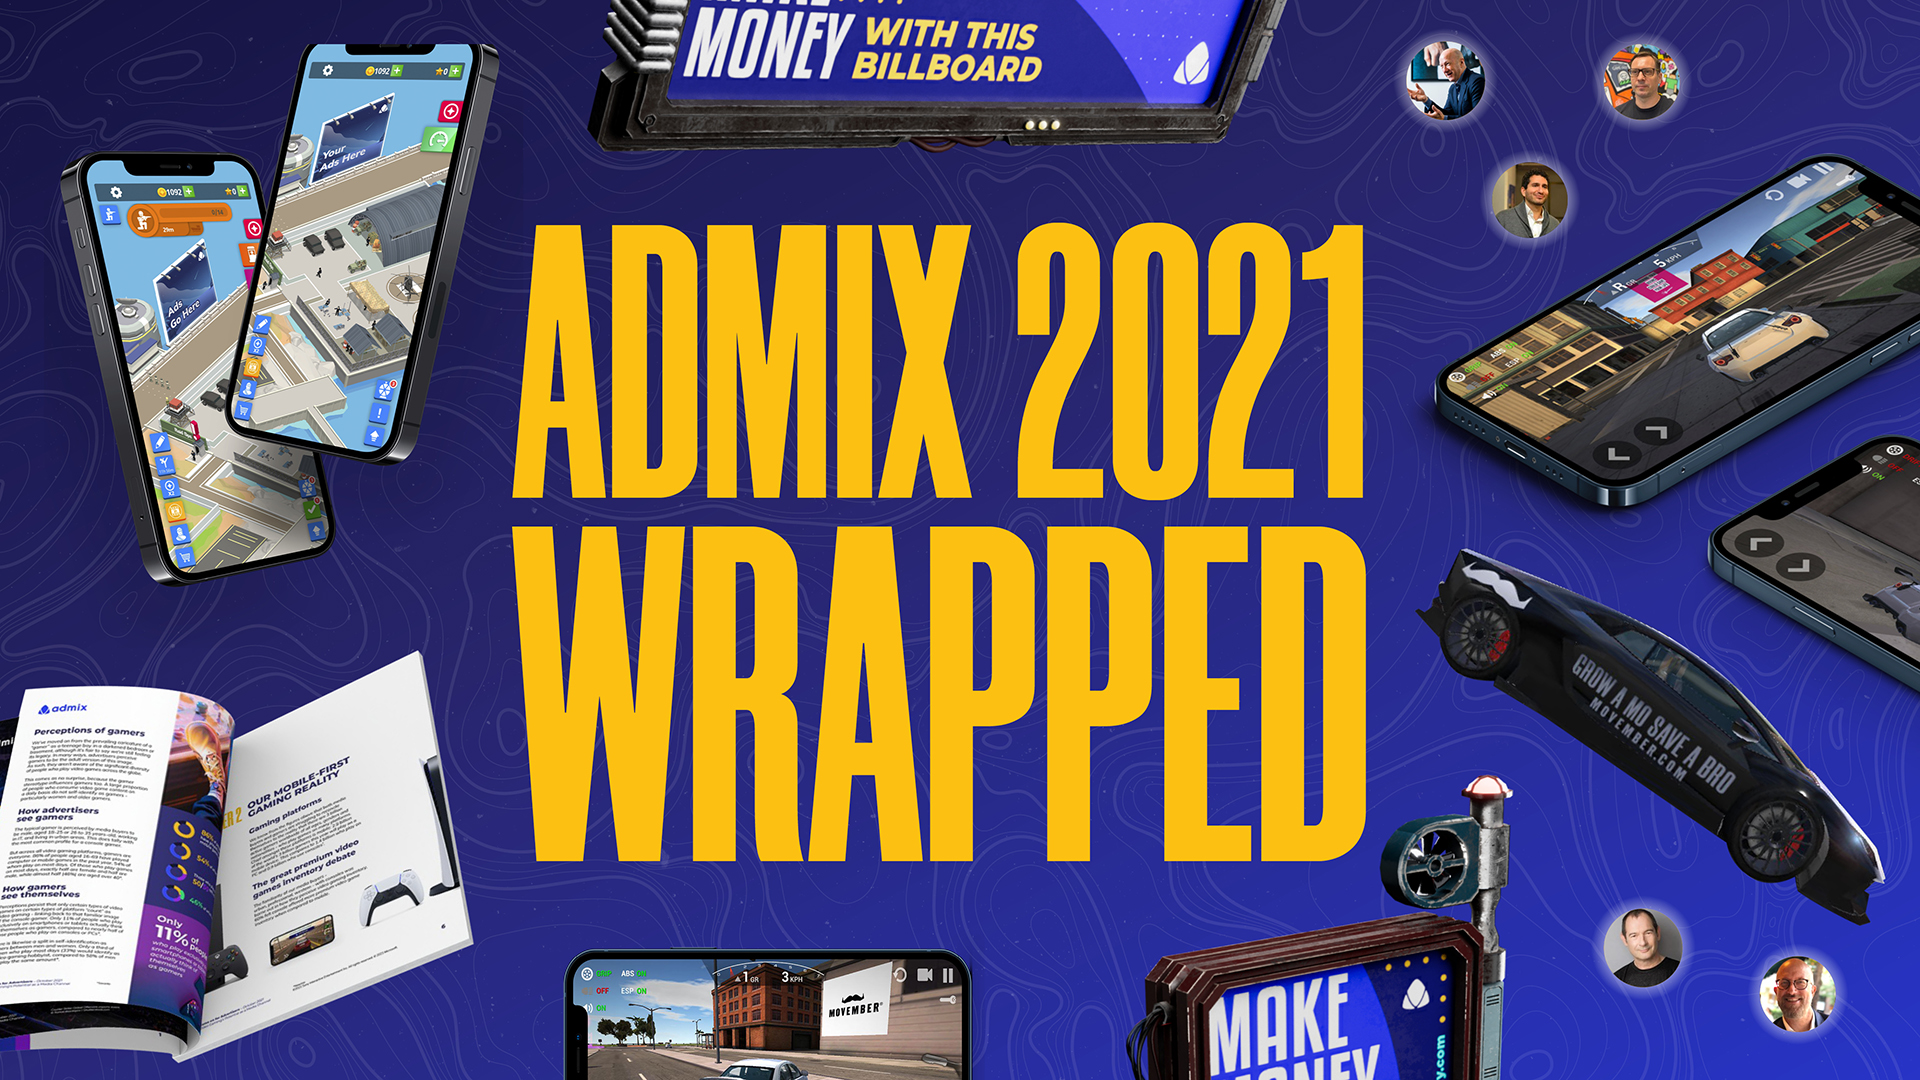 Admix: 2021 Wrapped